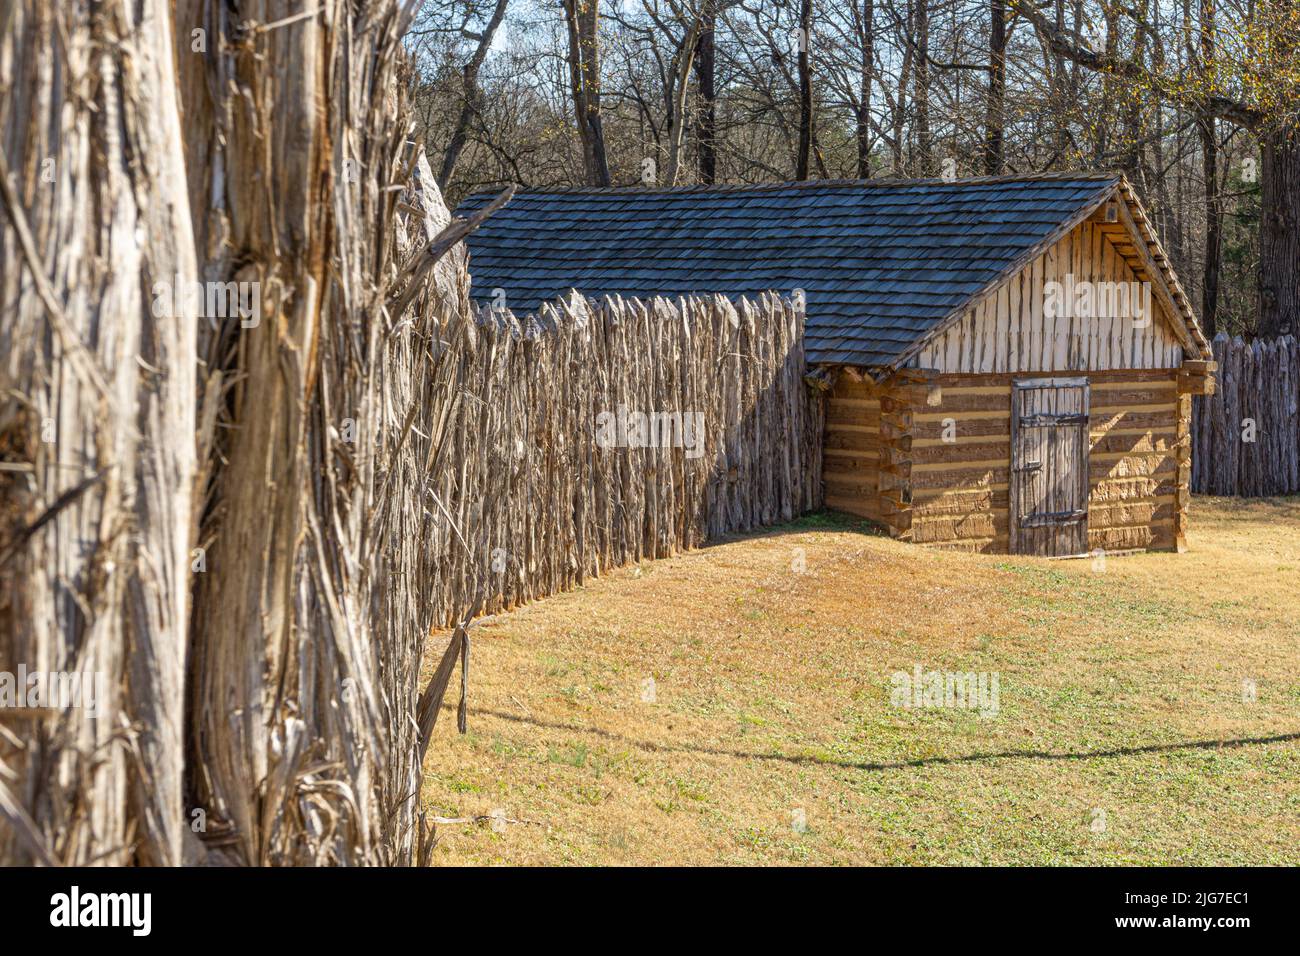 Reconstruction of the log building and stockade fence at the site of the first Southern battle of the Revolutionary War in Ninety-Six, South Carolina Stock Photo